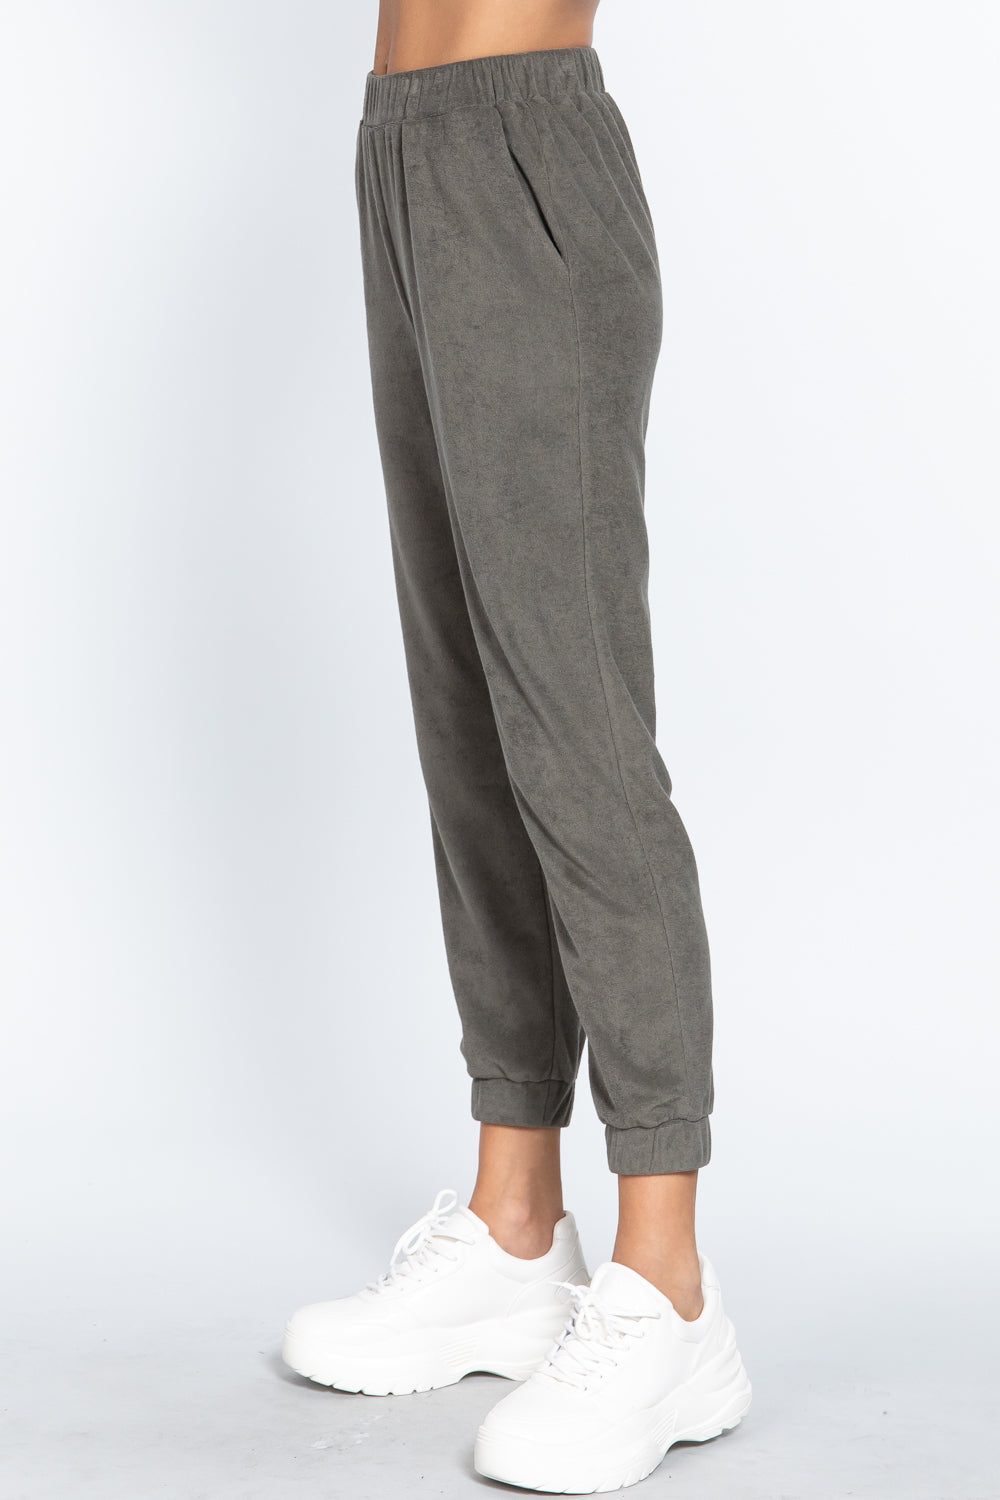 THE LIFE Terry Towelling Long Jogger Pants